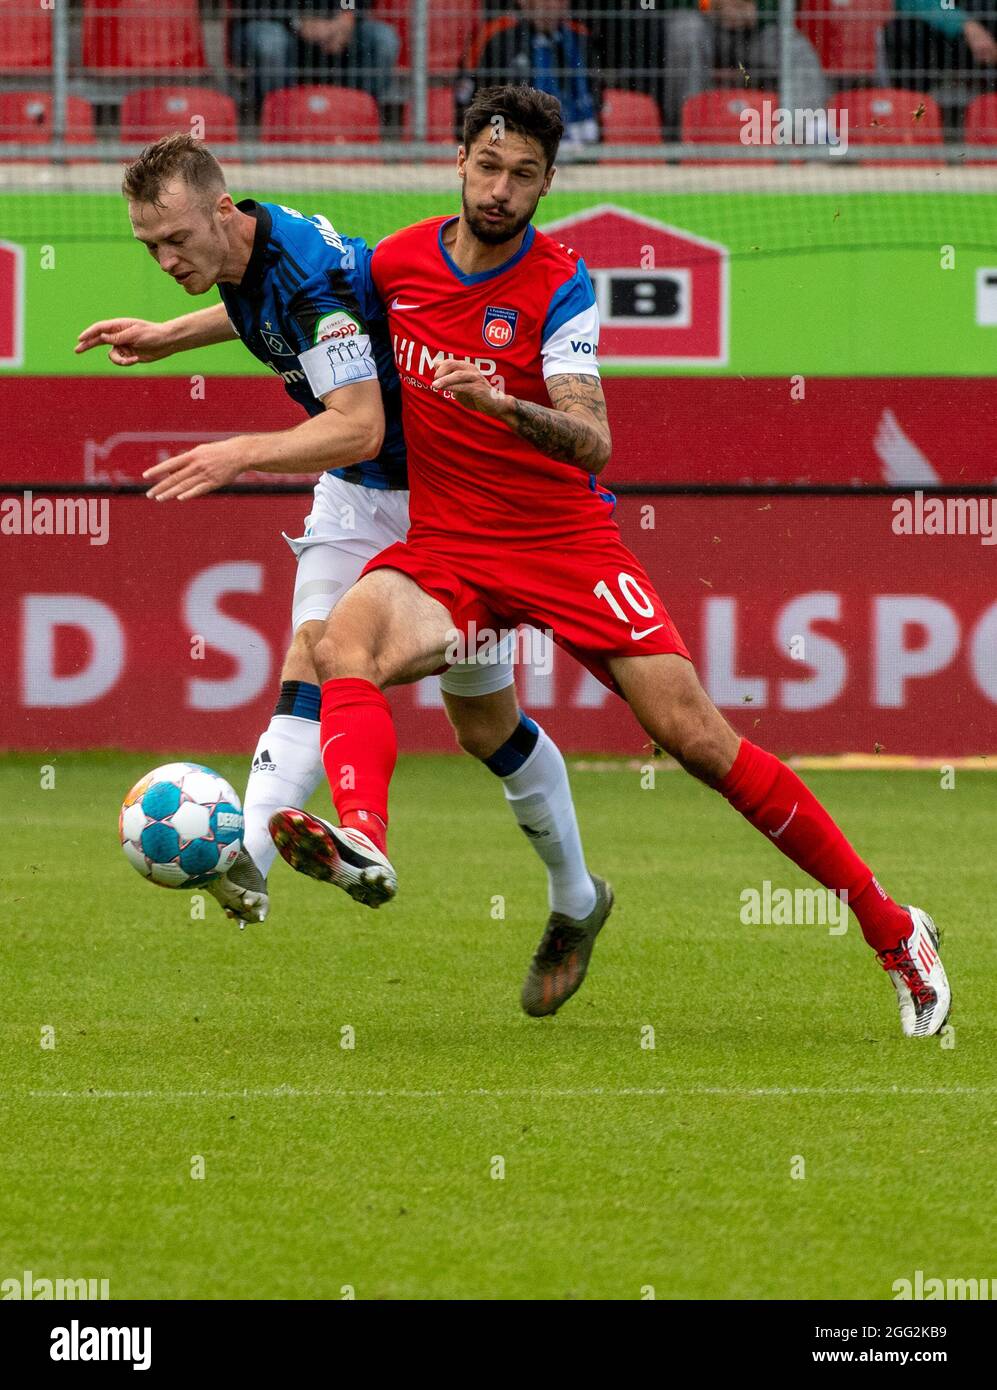 Heidenheim, Germany. 26th Aug, 2021. Football: 2. Bundesliga, 1. FC Heidenheim - Hamburger SV, Matchday 5 at Voith-Arena. Heidenheim's Tim Kleindienst (r) and Hamburg's Sebastian Schonlau fight for the ball. Credit: Stefan Puchner/dpa - IMPORTANT NOTE: In accordance with the regulations of the DFL Deutsche Fußball Liga and/or the DFB Deutscher Fußball-Bund, it is prohibited to use or have used photographs taken in the stadium and/or of the match in the form of sequence pictures and/or video-like photo series./dpa/Alamy Live News Stock Photo